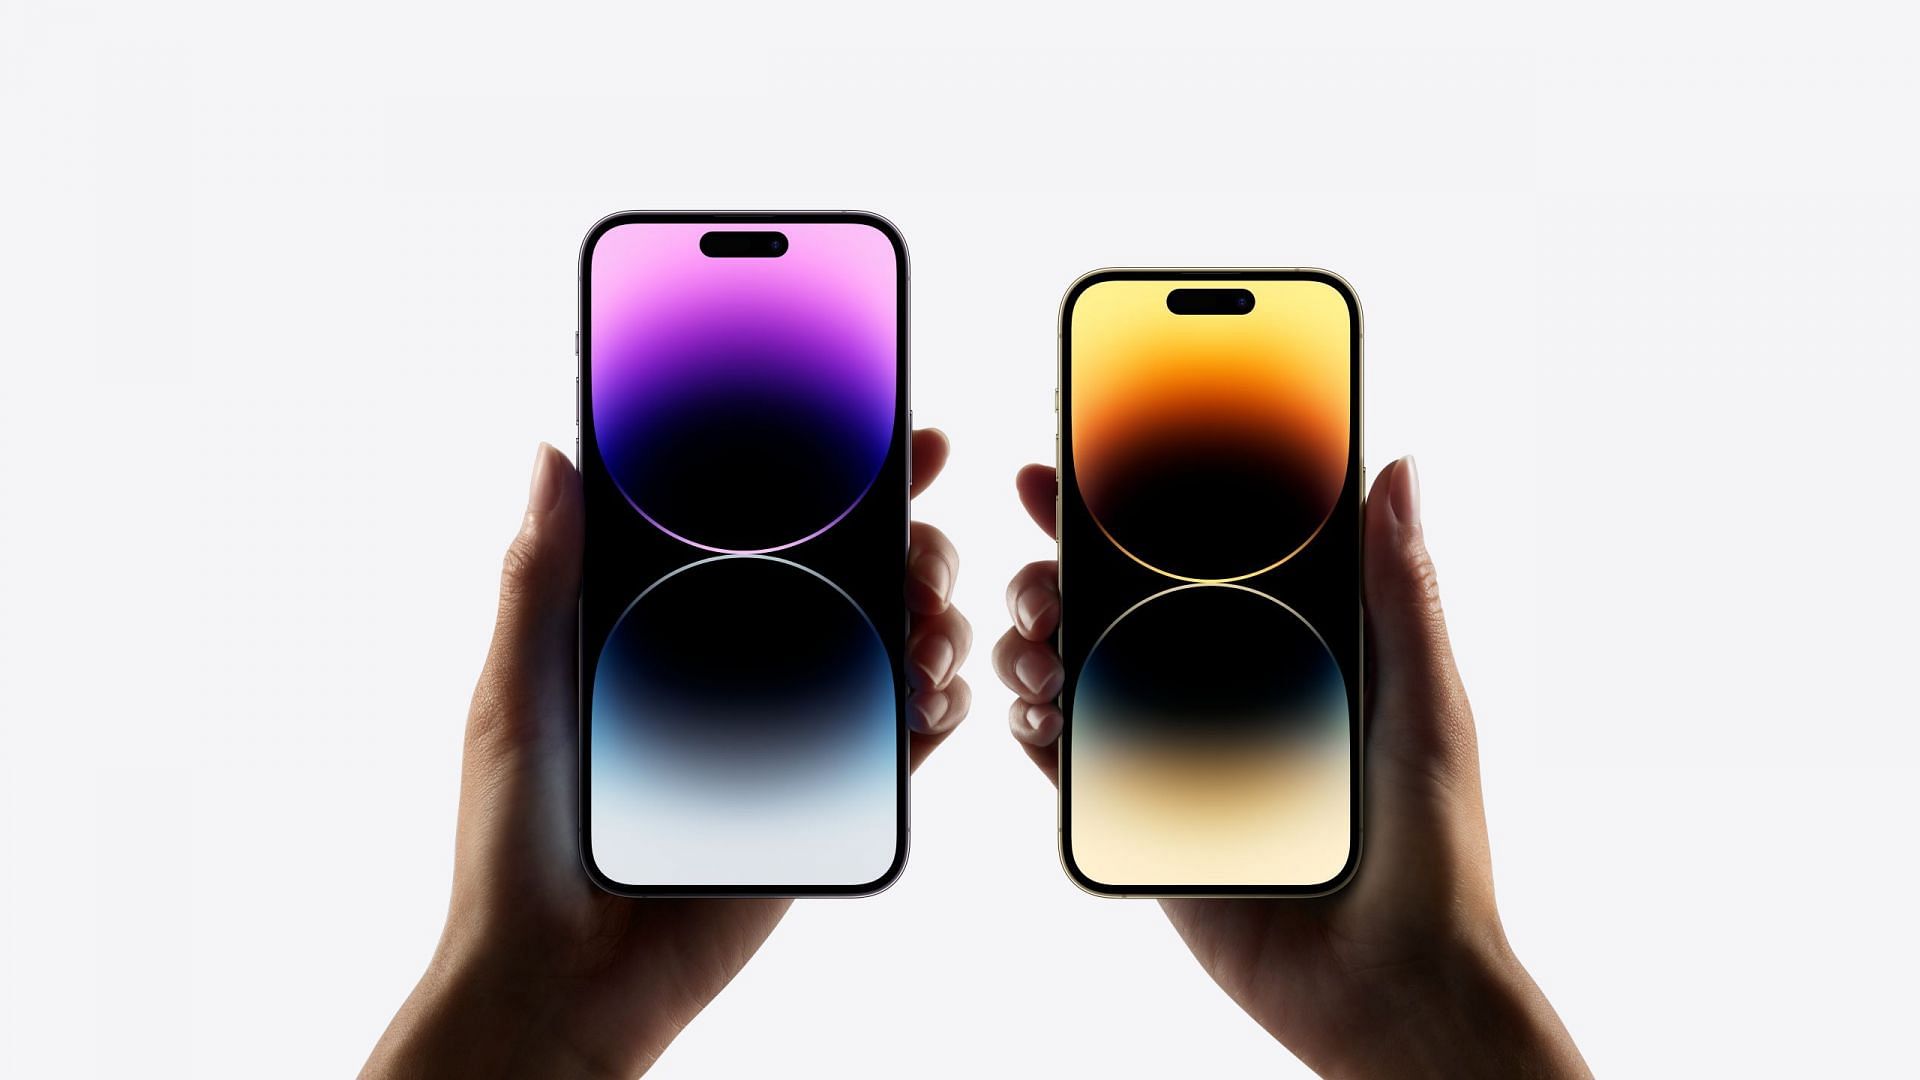 Apple iPhone 14 Pro and 14 Pro Max are two of the most popular Apple devices. (Image via Apple).